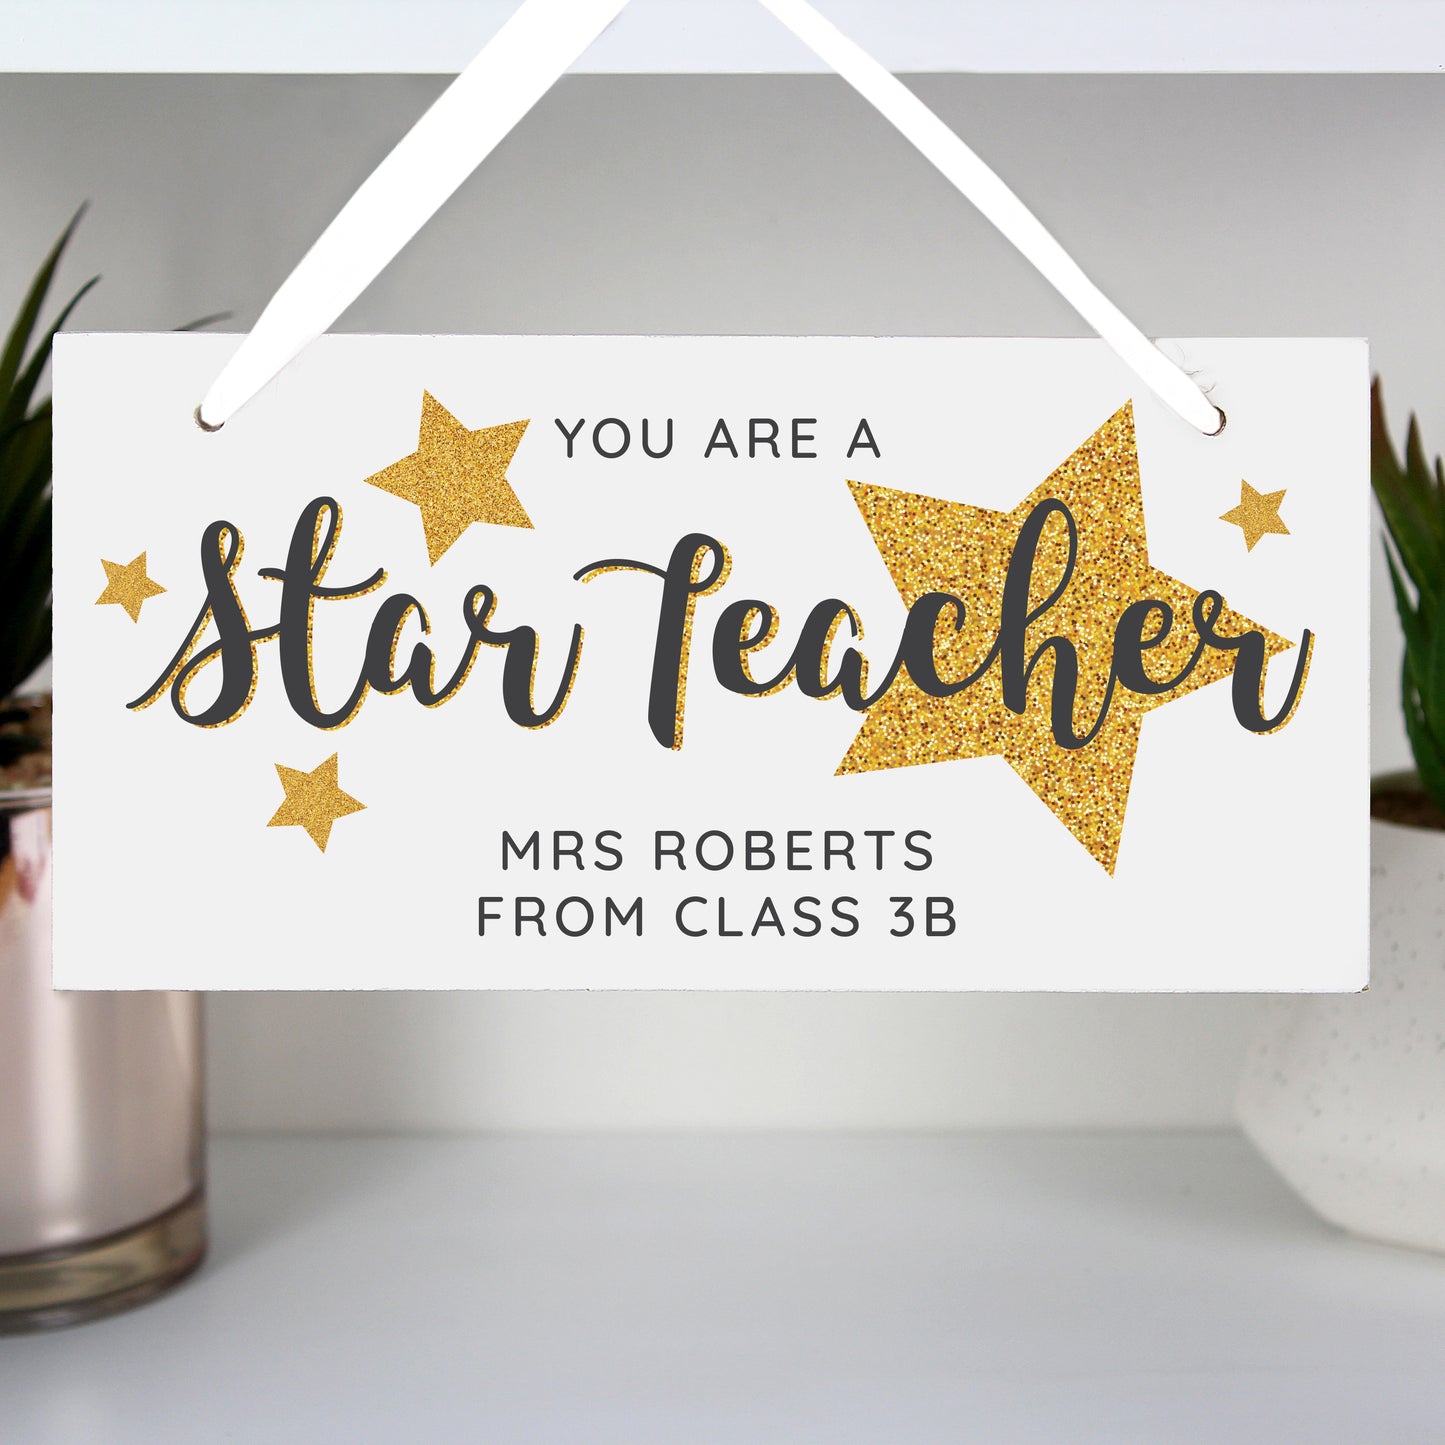 Personalised You Are A Star Teacher Wooden Sign - Personalise It!